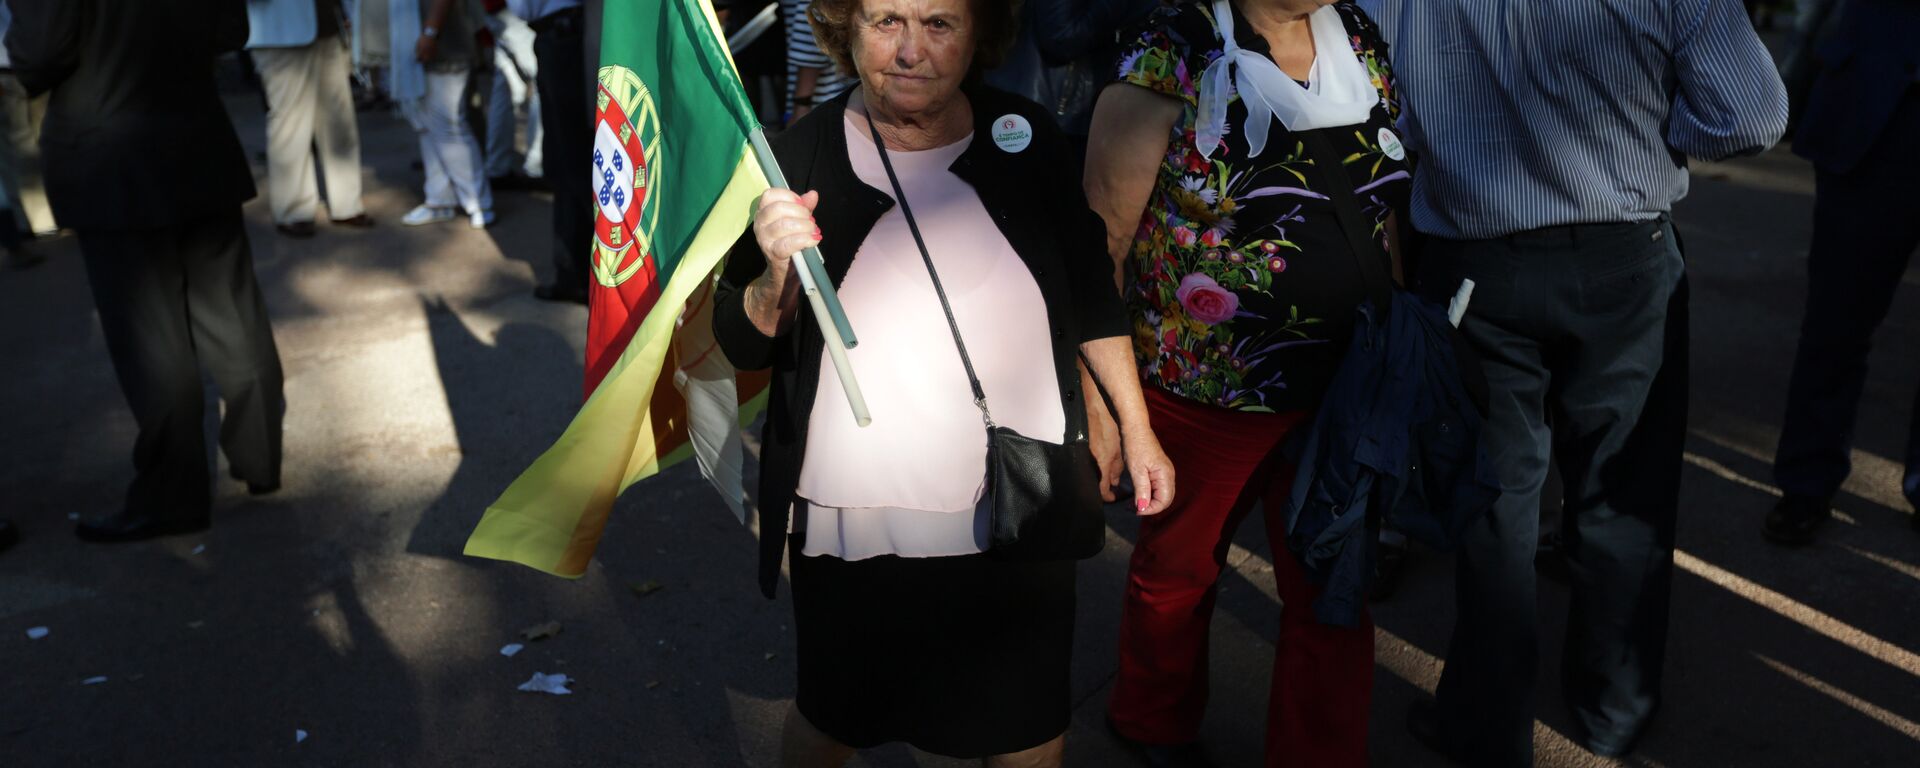 A supporter of the Portuguese Socialist Party carries a Portuguese flag while waiting for the arrival of the party leader Antonio Costa during a campaign action in Lisbon Tuesday, Sept. 29 2015. - Sputnik International, 1920, 11.03.2024